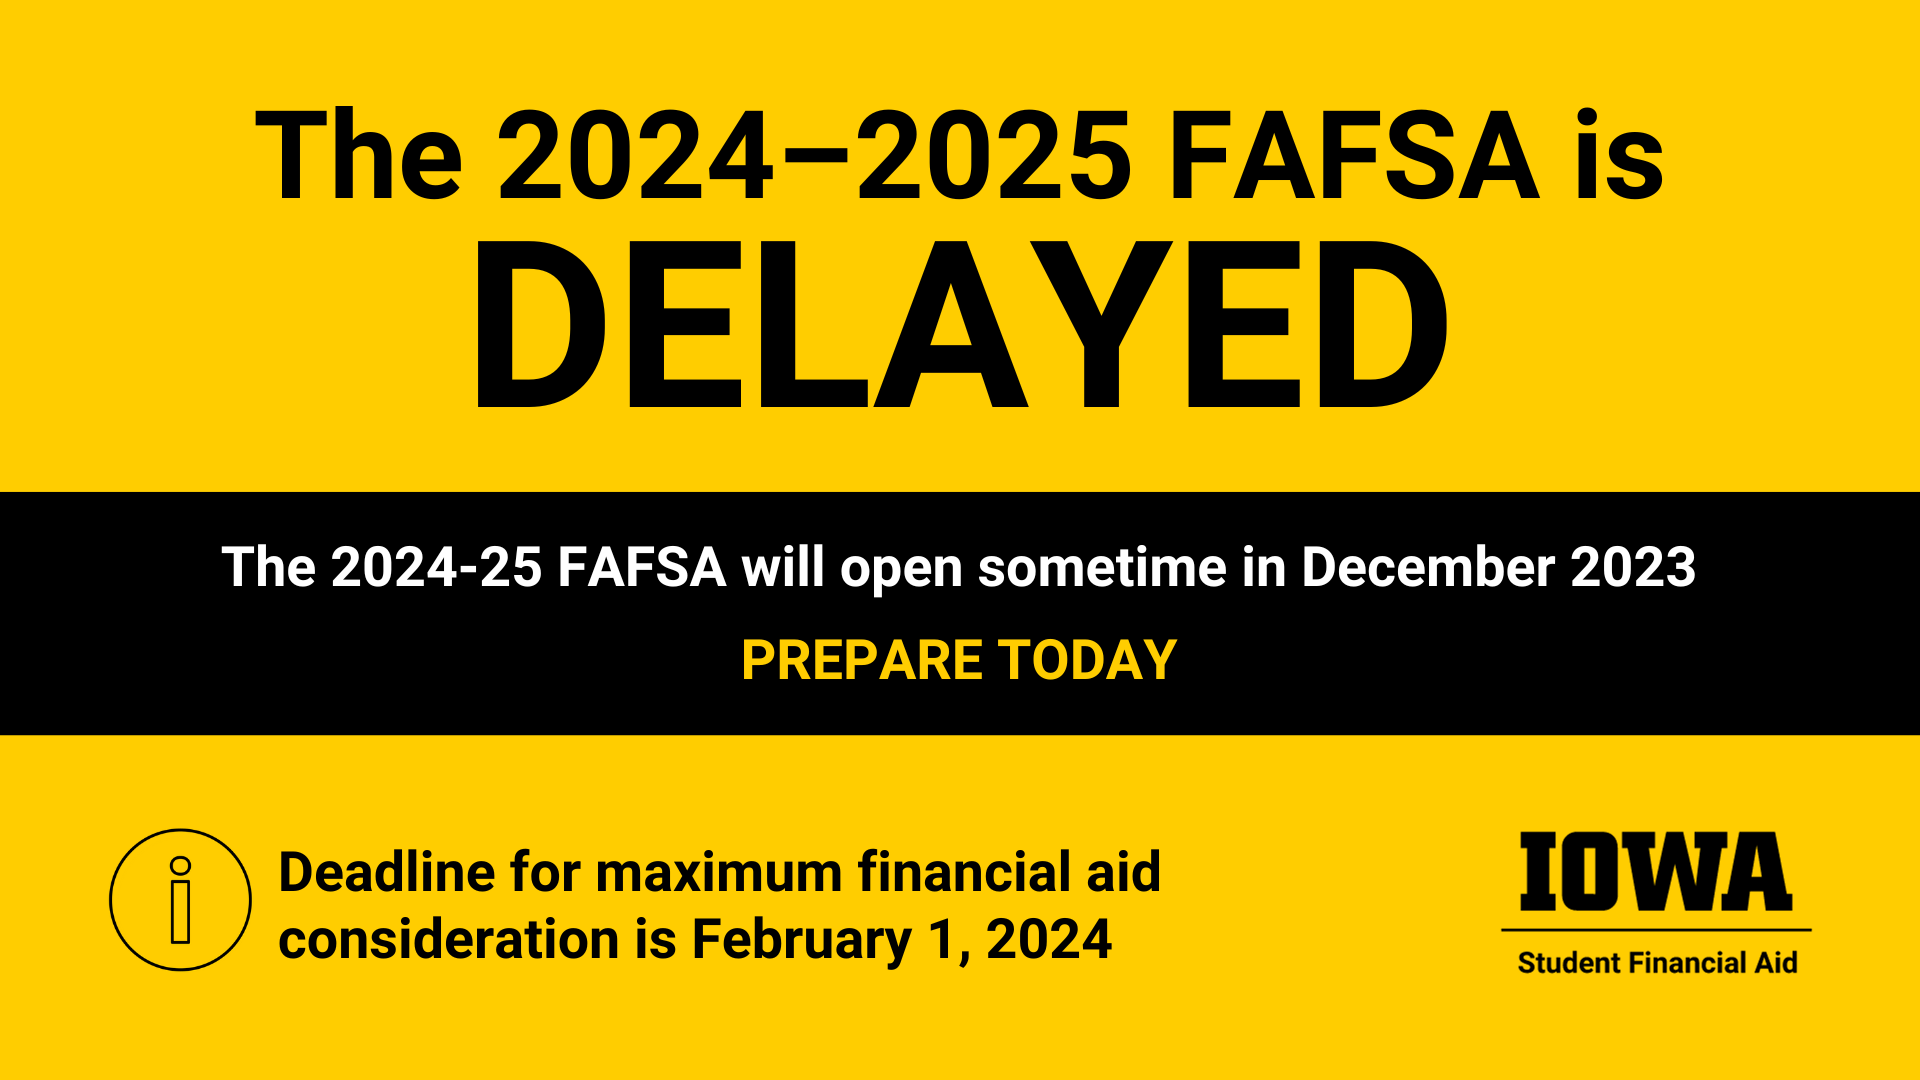 The 2024-2025 FAFSA is DELAYED